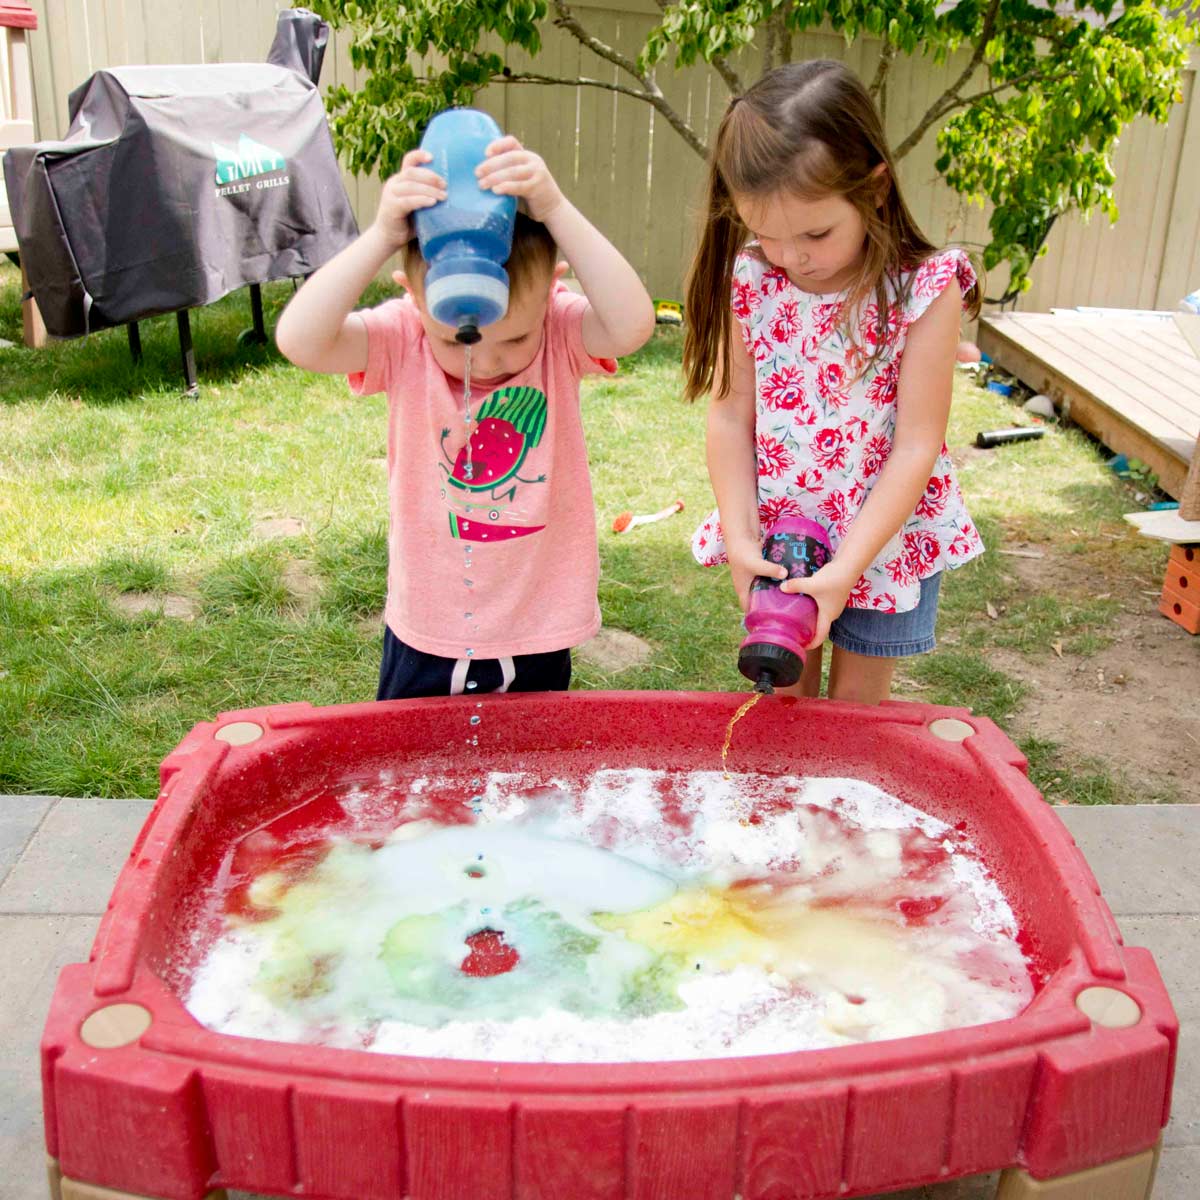 Two children stand in a backward at a water table full of baking soda using squirt bottles to squeeze in colorful vinegar.